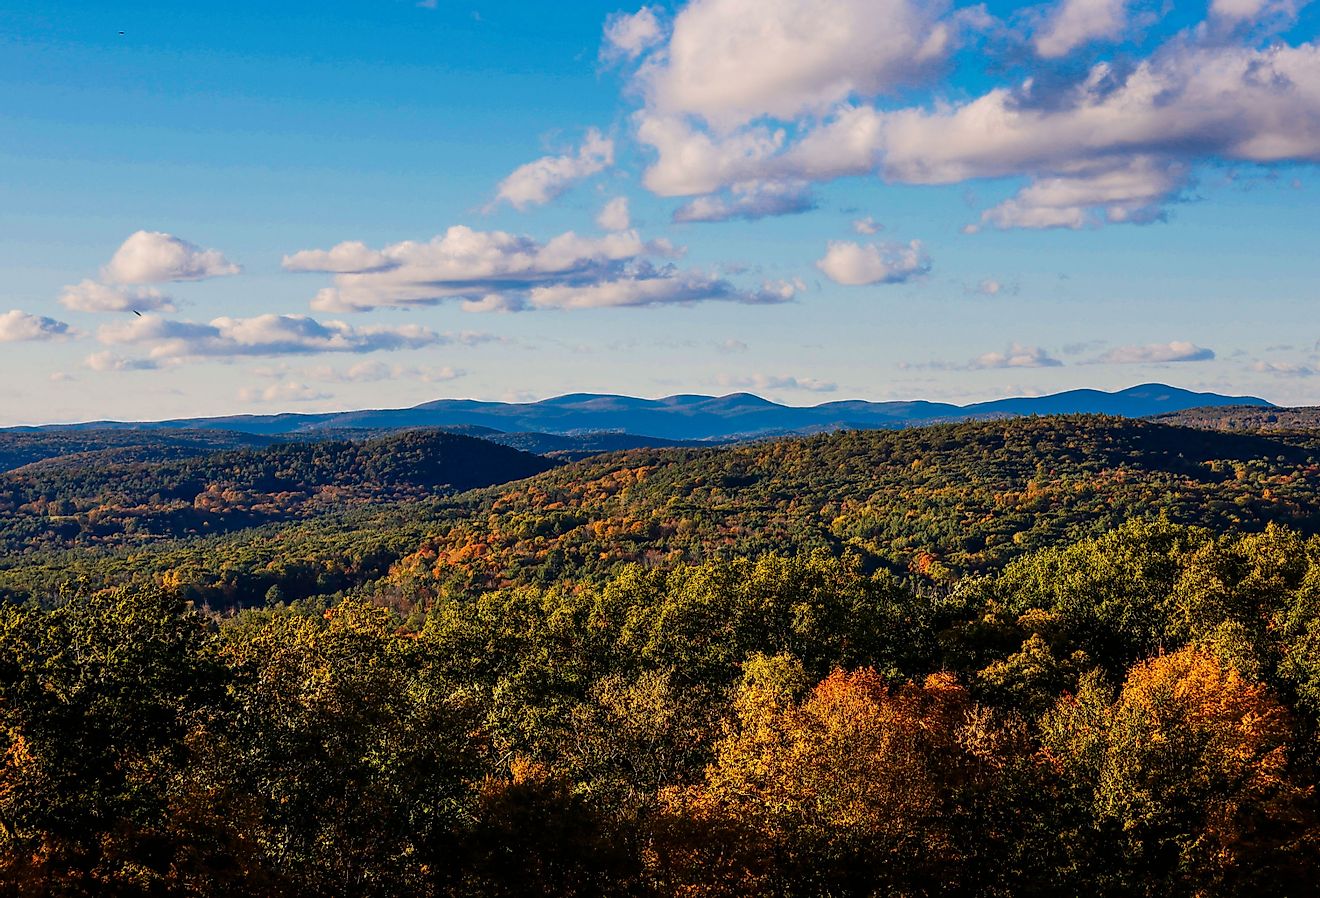 The Berkshire Hills seen from atop Mohawk Mountain with fall colors in Cornwall Connecticut. Image credit Alexanderstock23 via Shutterstock.